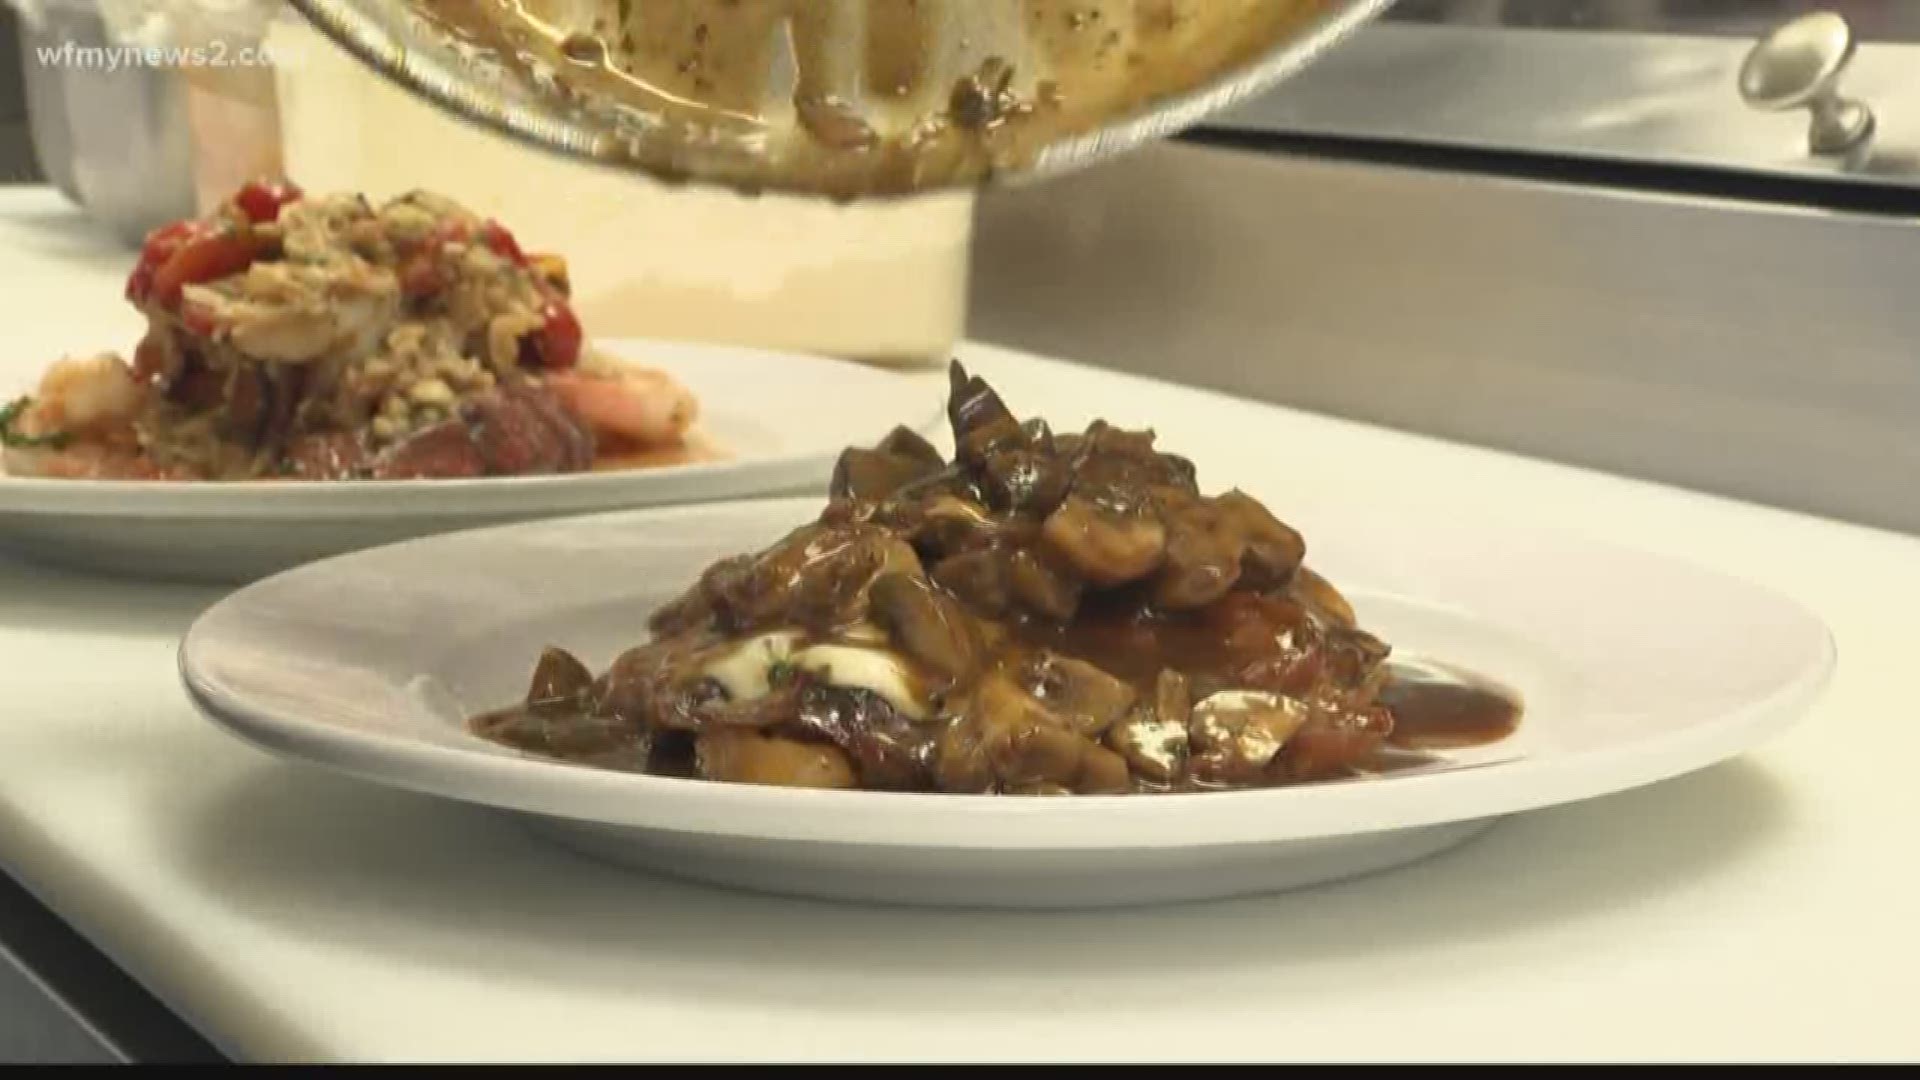 An Italian restaurant in Winston-Salem demonstrates why they’re repeat winners of the “Triad’s Best” competition.